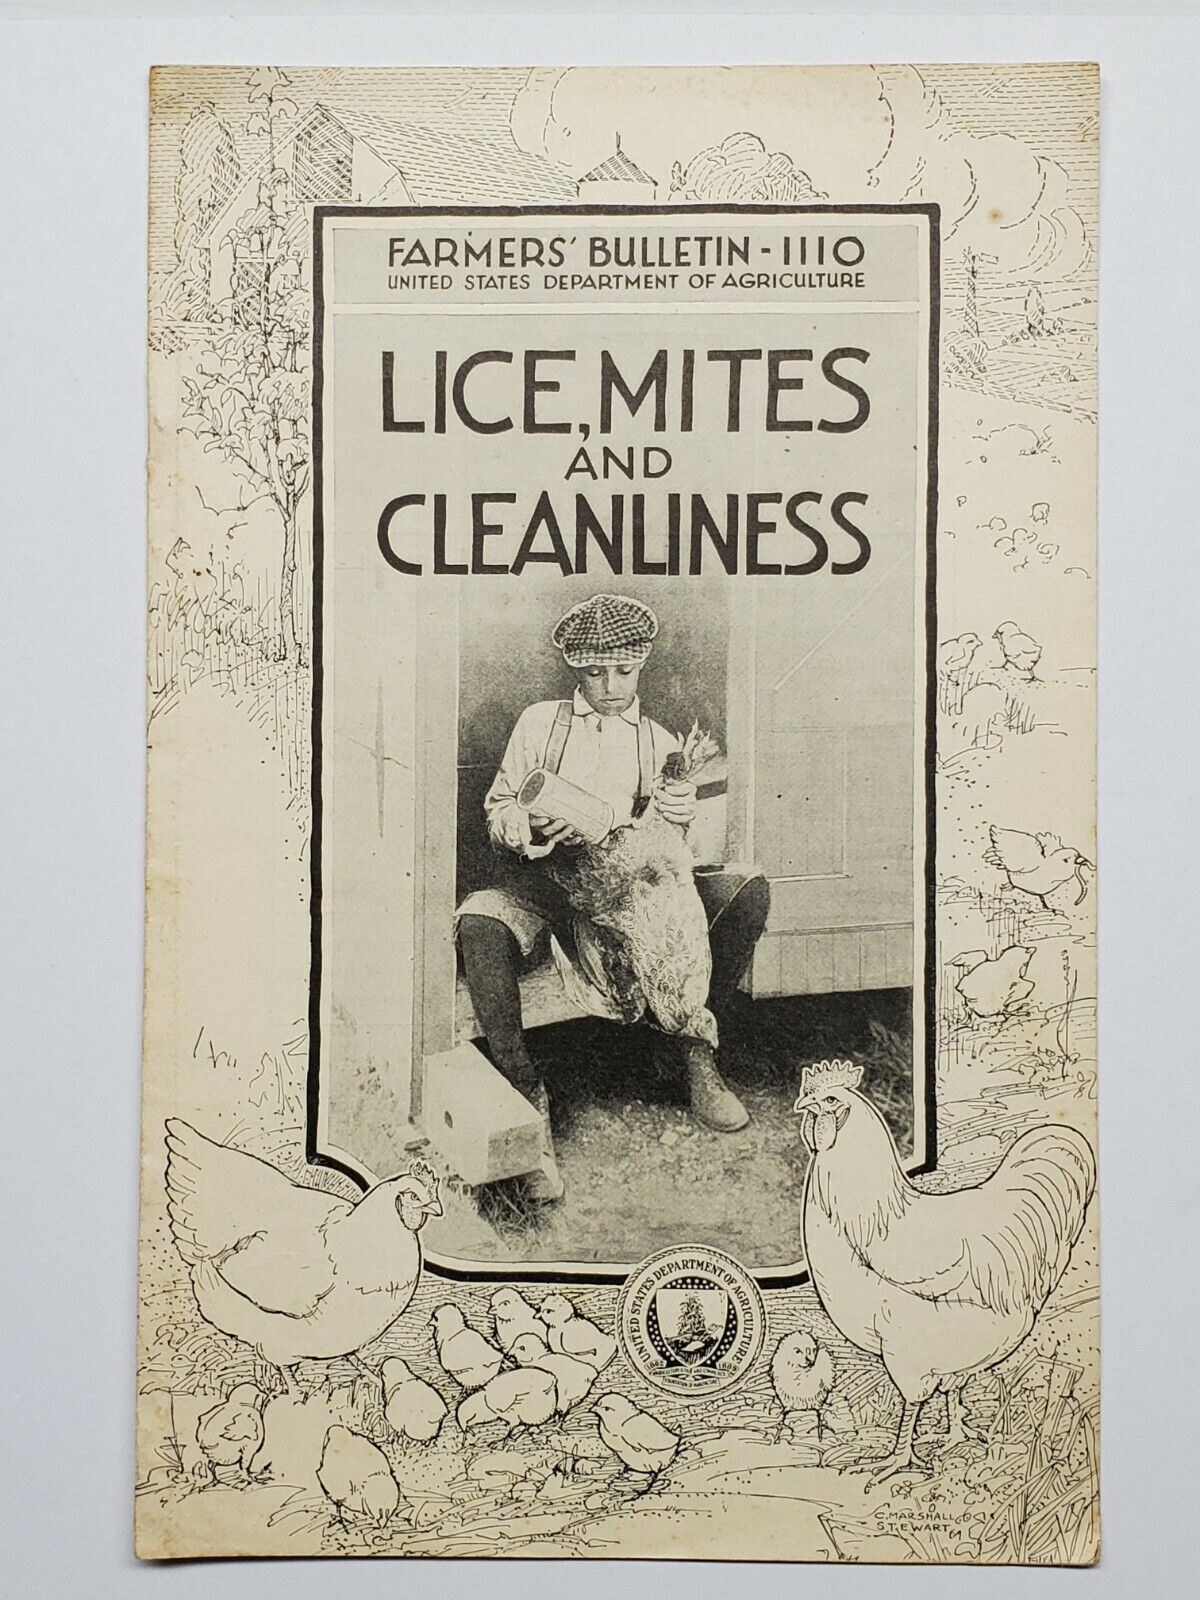 Lice Mites Cleanliness Chicken Farmers Bulletin 1110 US Dept of Agriculture 1921